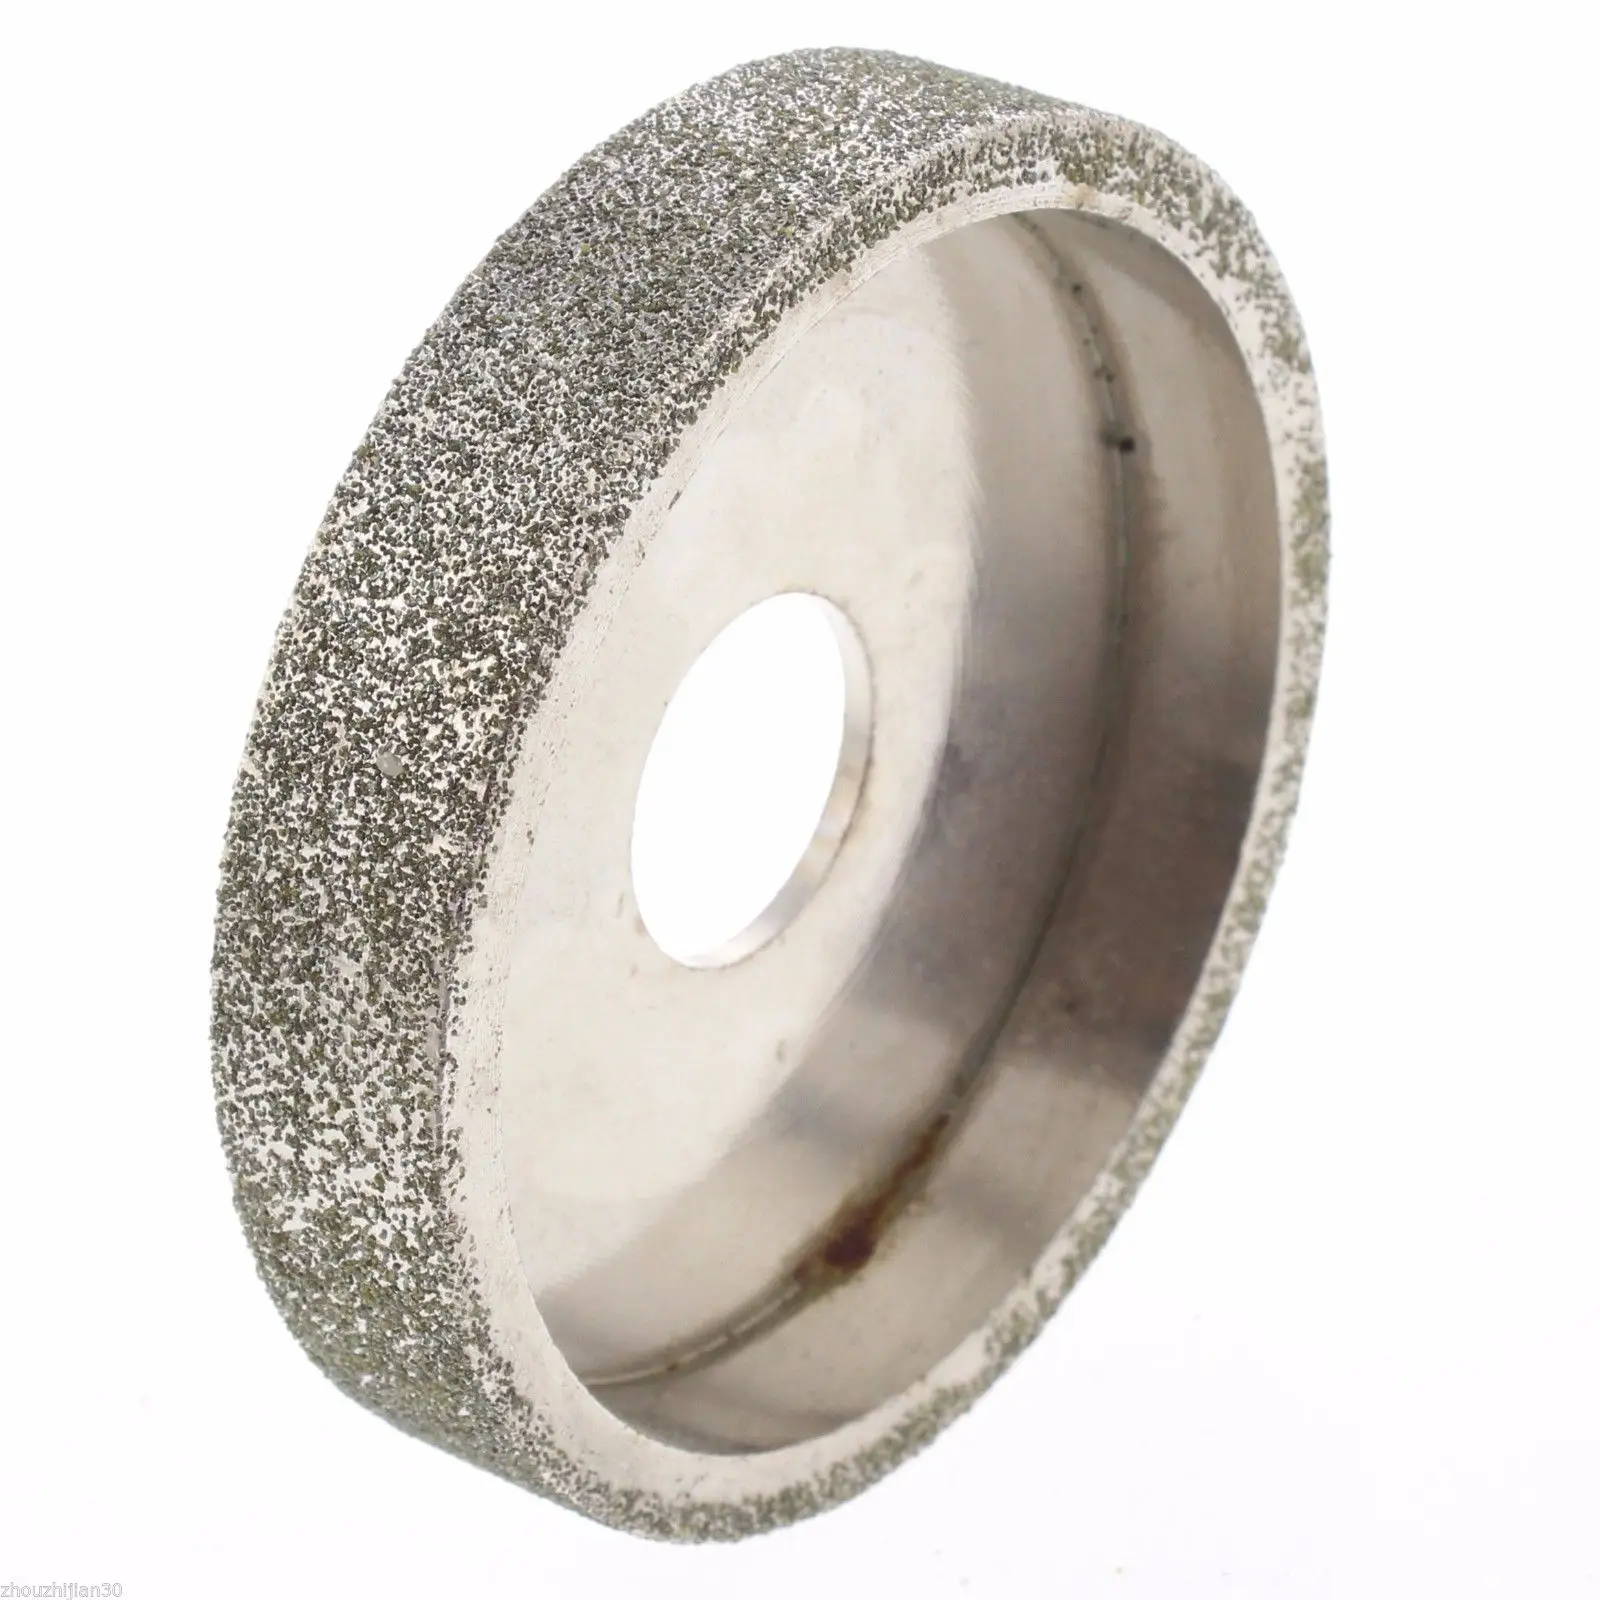 3-inch-lapidary-electroplated-diamond-grinding-wheel-for-angle-grinder-grit-80-ilovetool